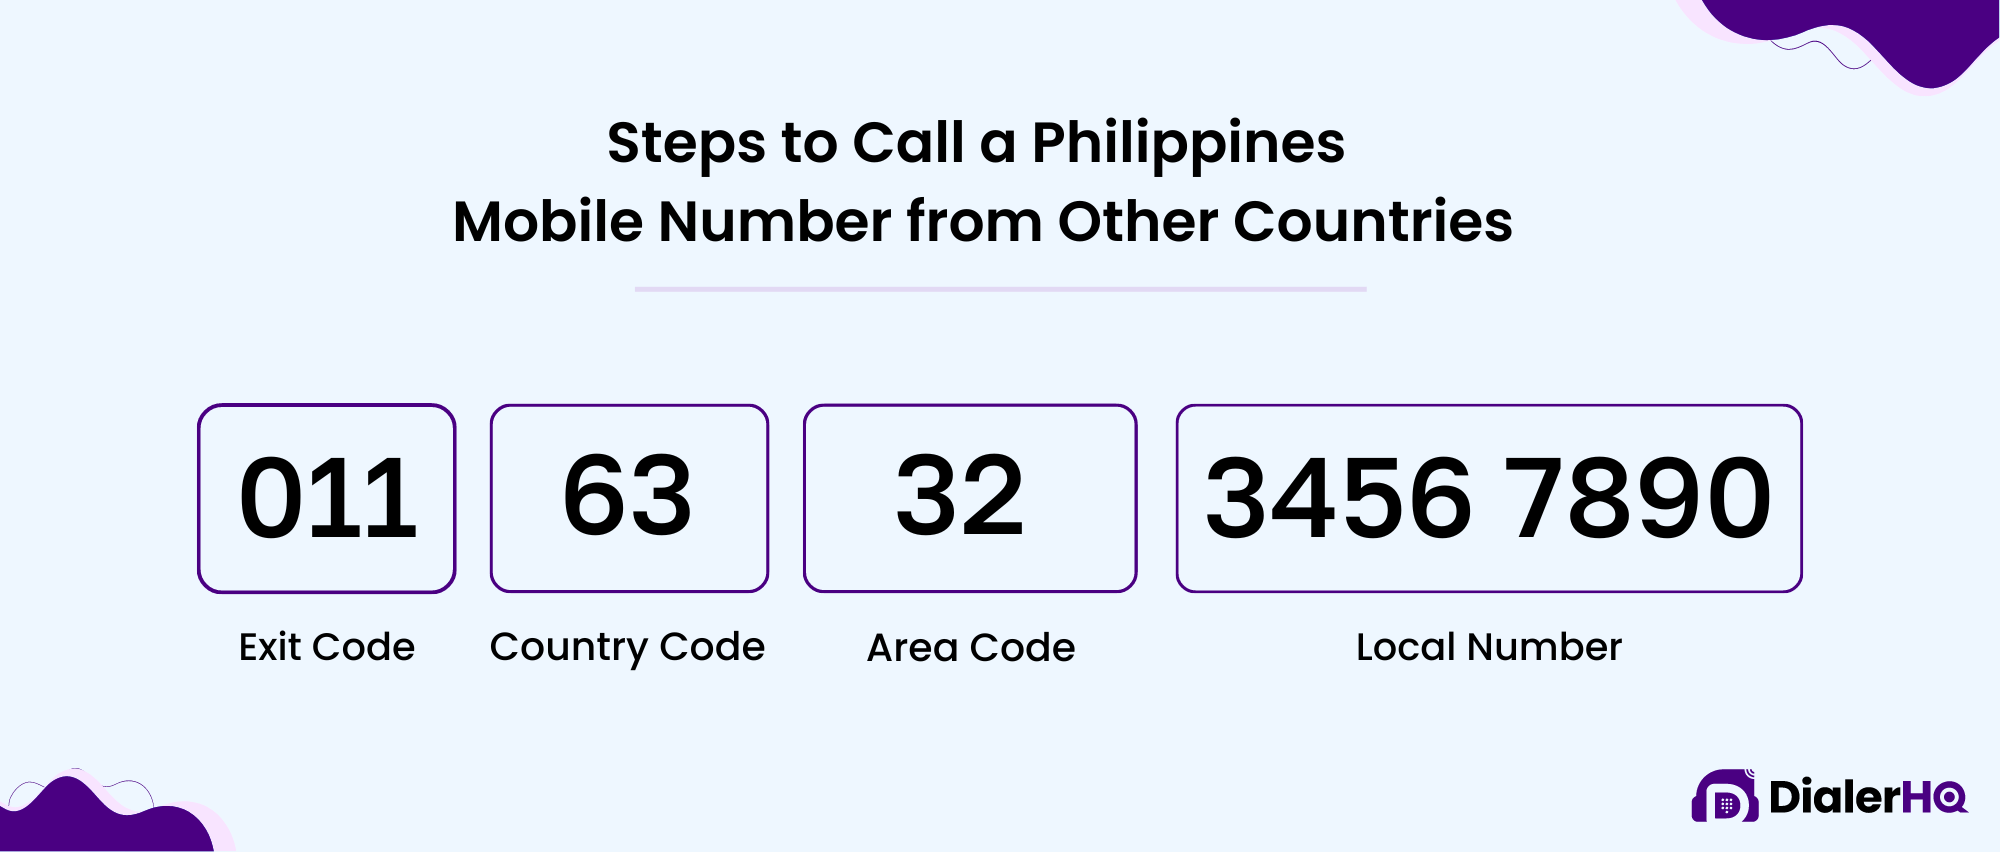 Steps to Call a Philippines Mobile Number from Other Countries